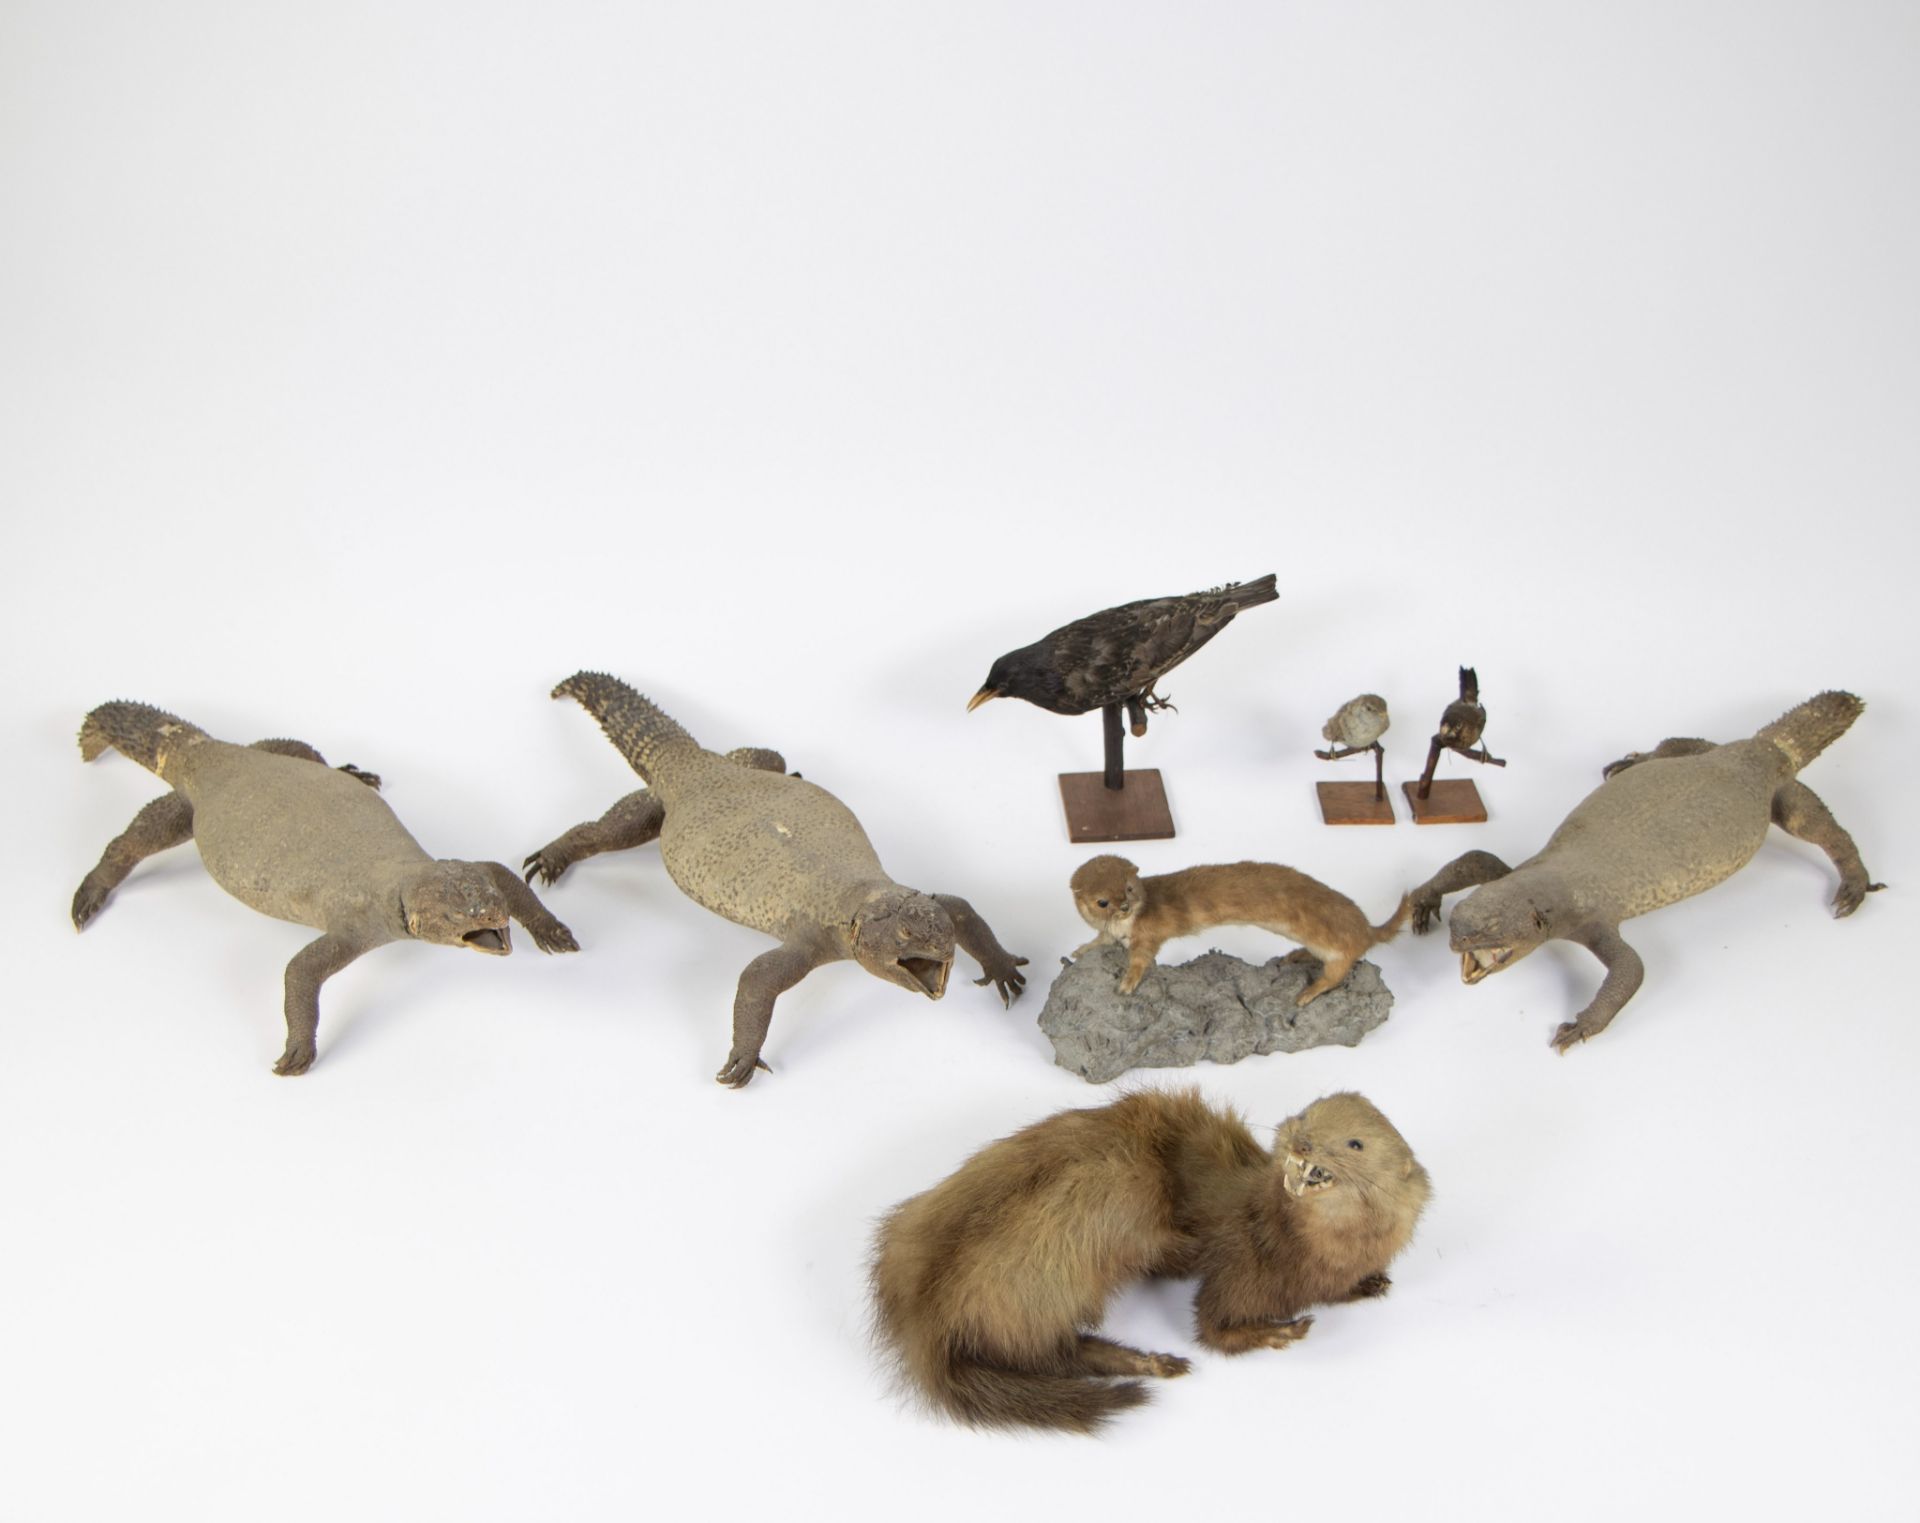 Collection of taxidermy birds, short-tailed monitor lizard and martens